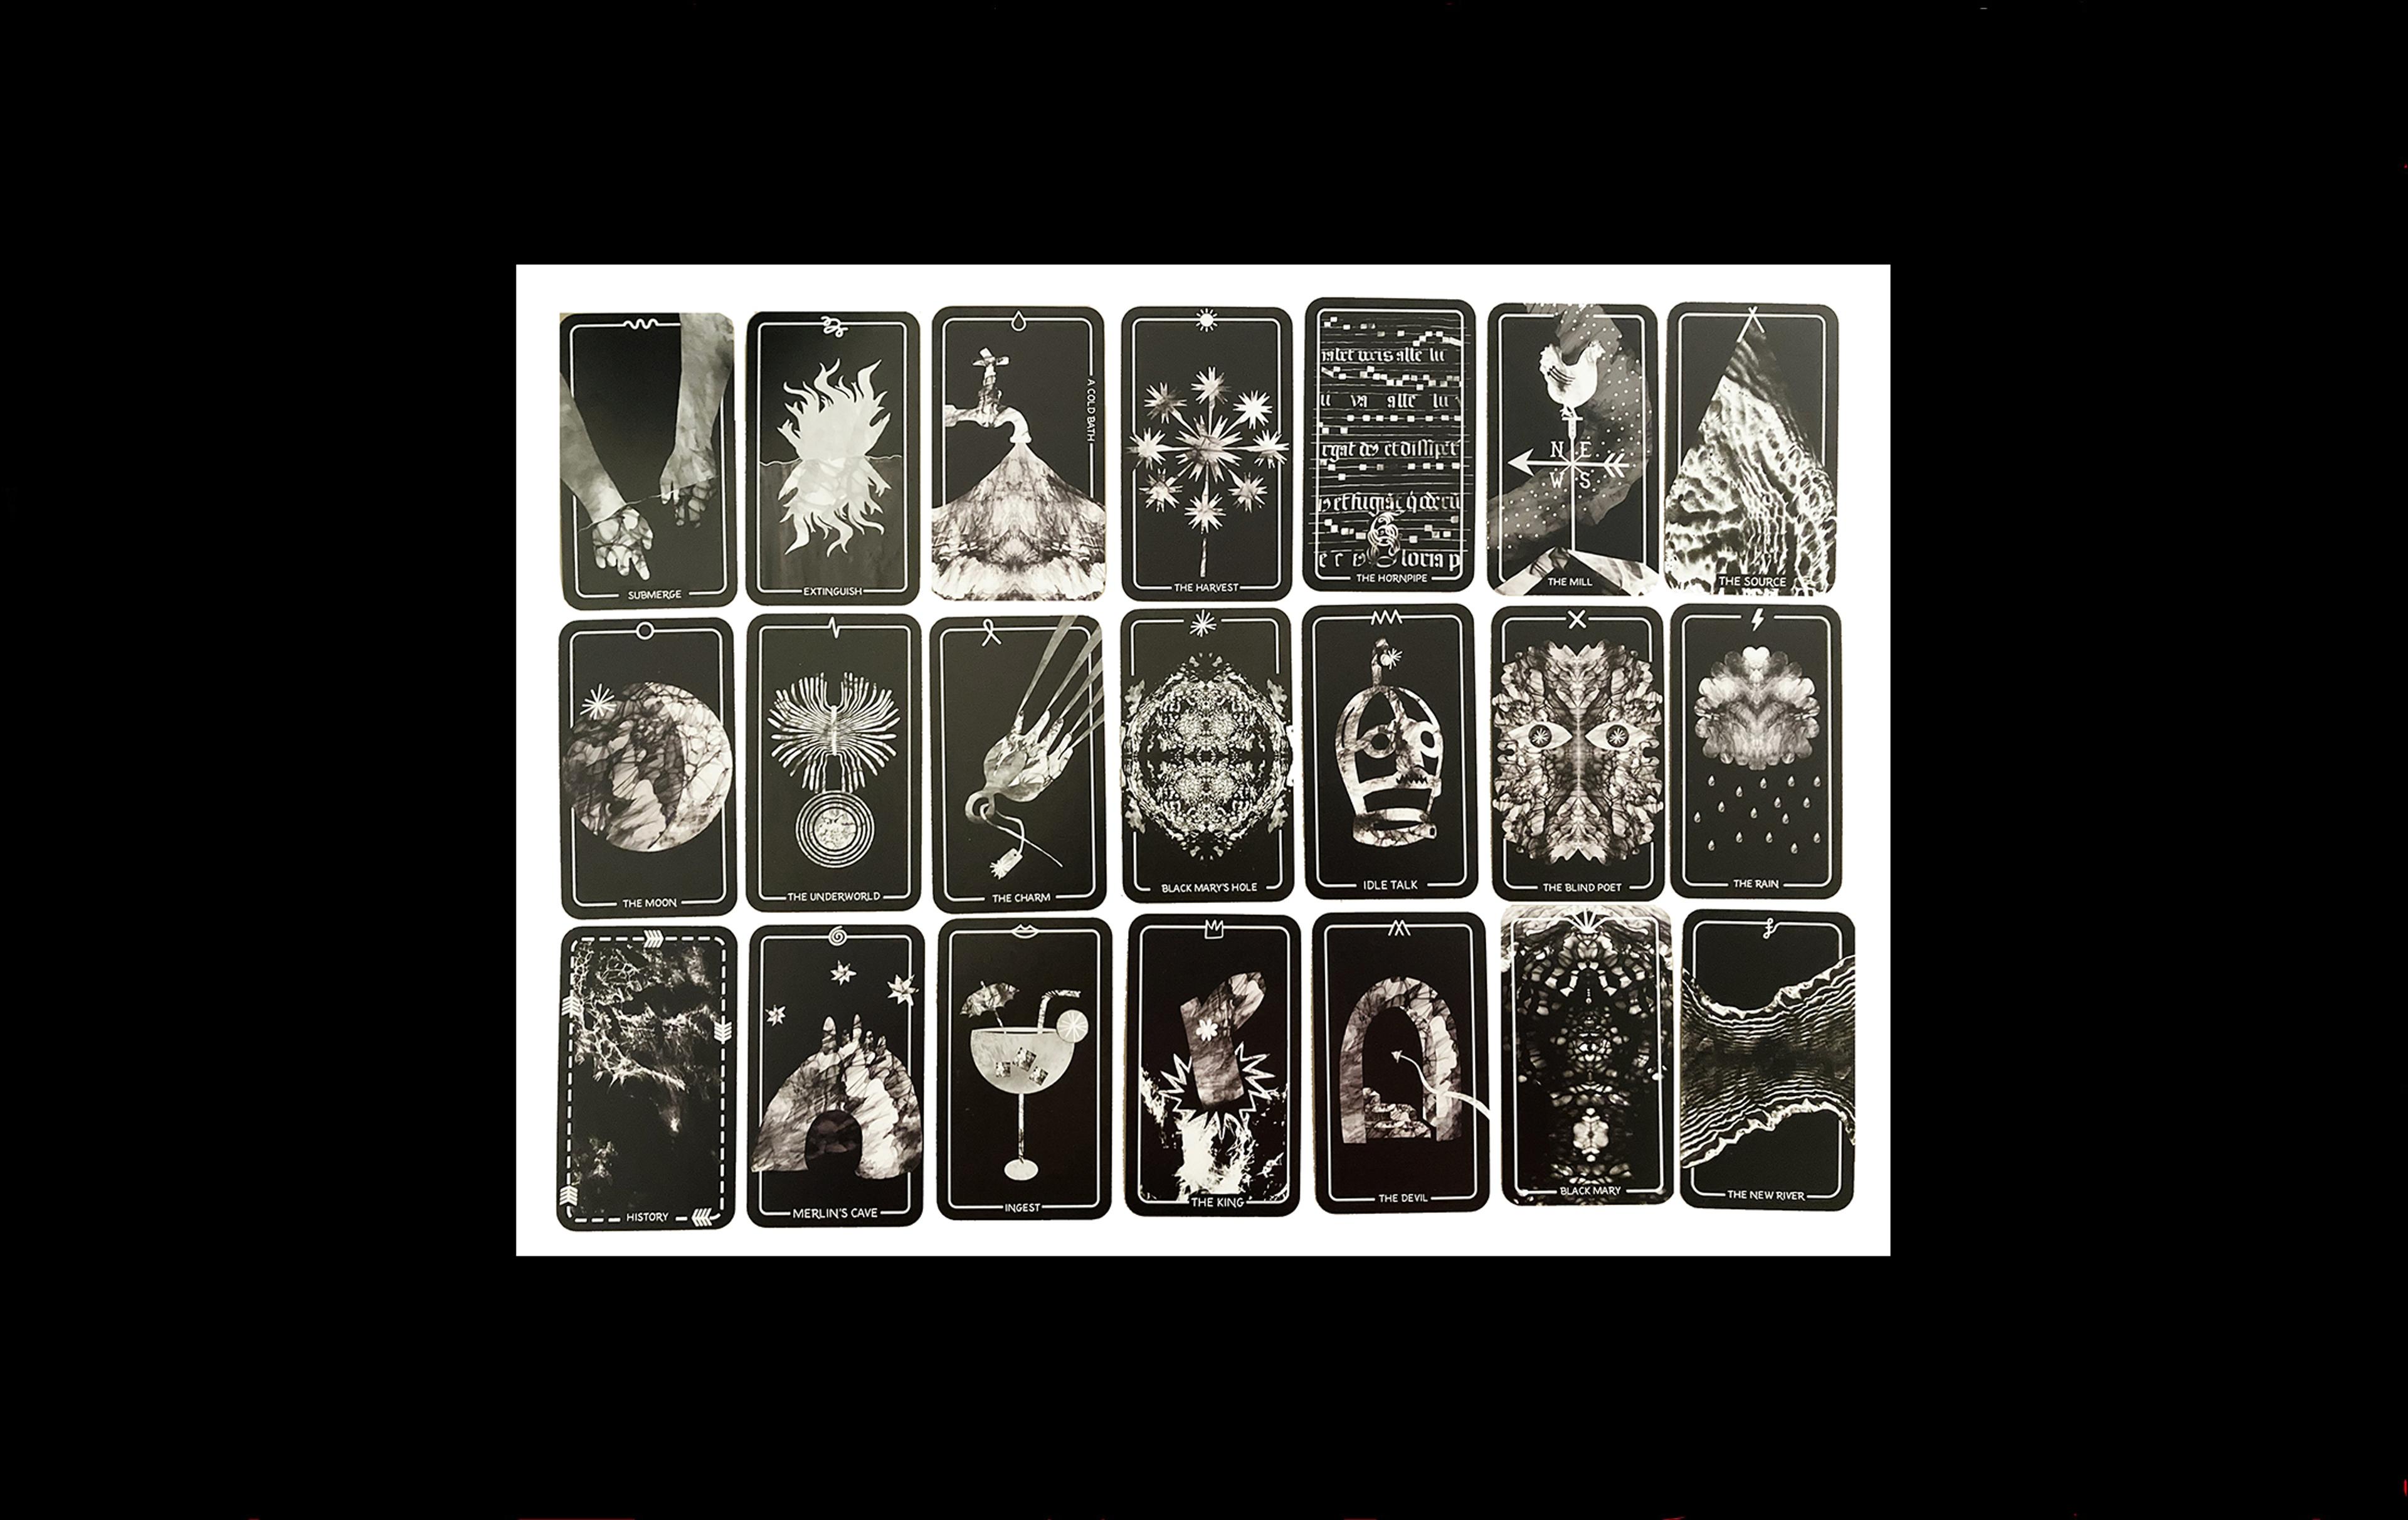 Photograph of 21 black and white printed playing cards, each with a different illustration and caption, including 'ingest' with an image of a cocktail,  and 'The King' with an image of a foot poking above the surface of the water